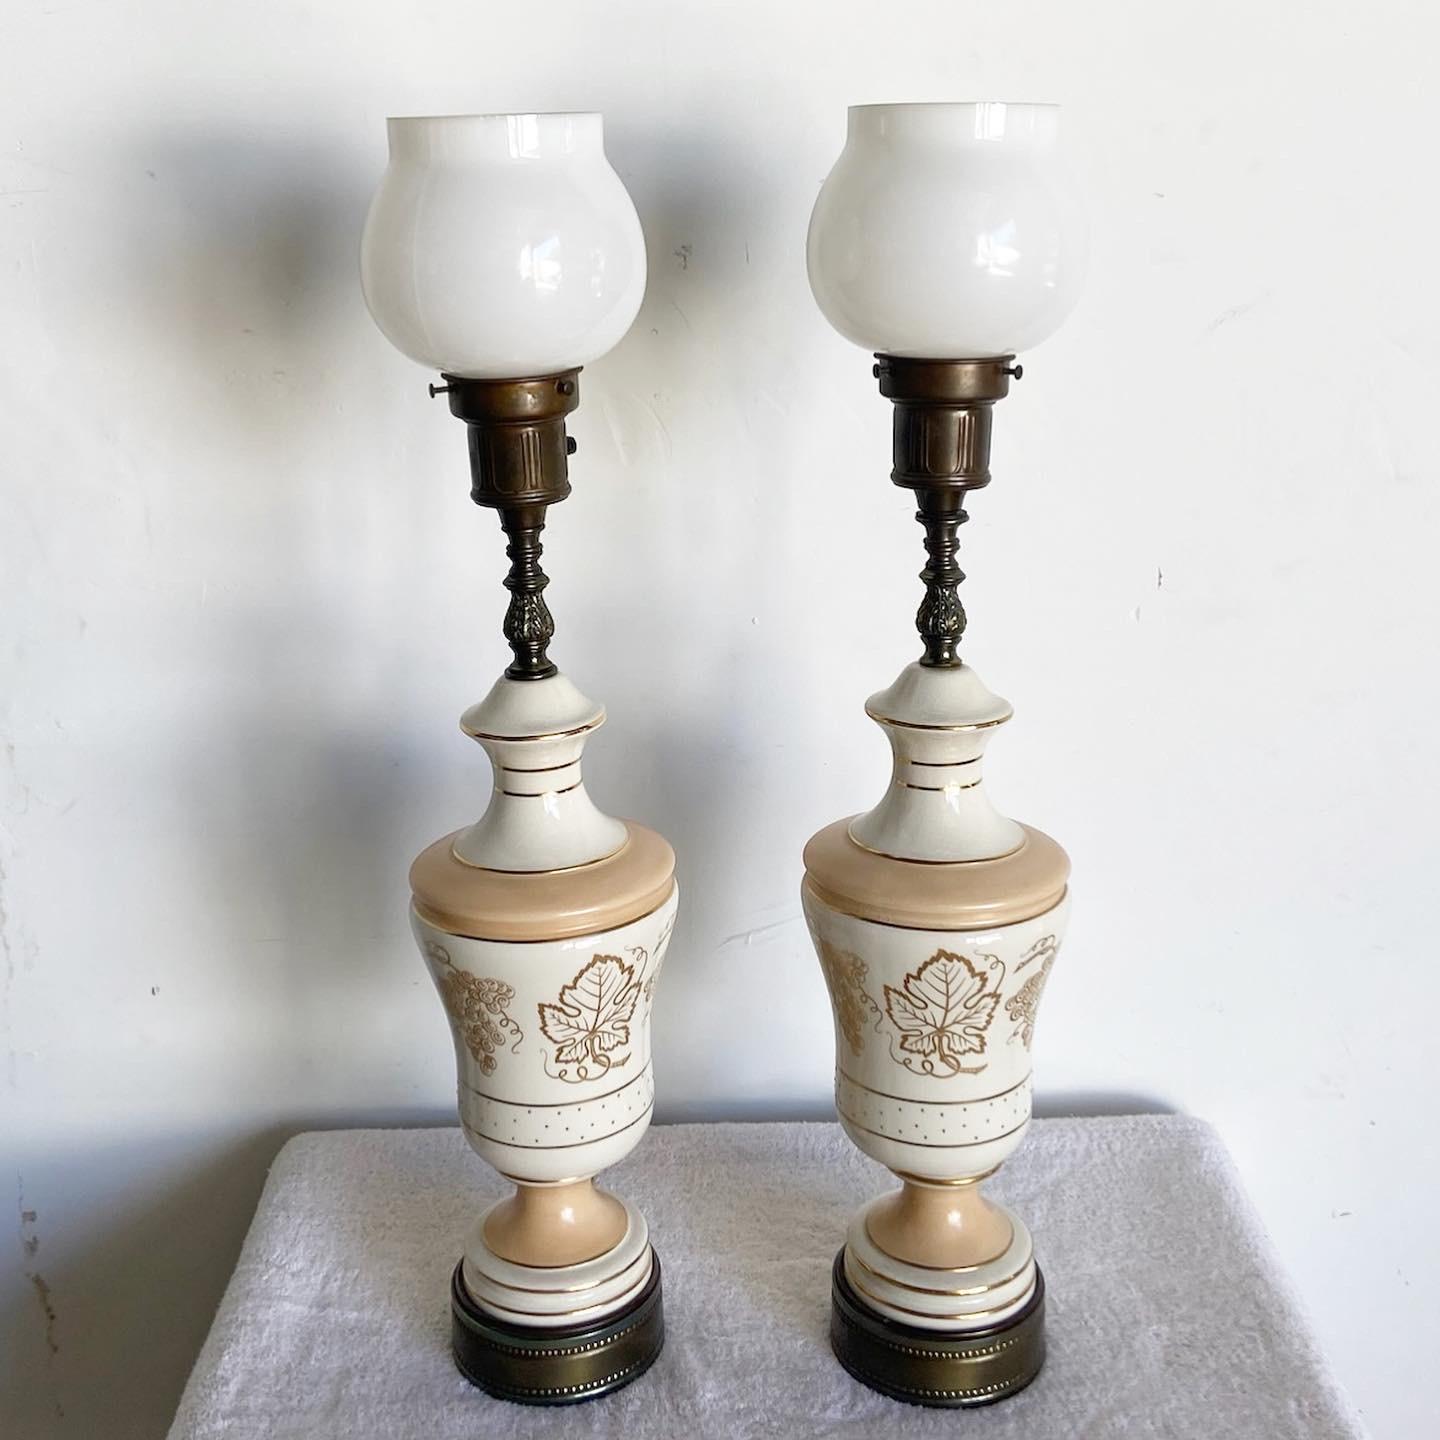 Illuminate your space with the wonderful pair of vintage mid century table lamps. Each lamp features a hand-painted porcelain body and glass lamp shades, combining elegance and vintage charm.

Wonderful pair of vintage mid century table